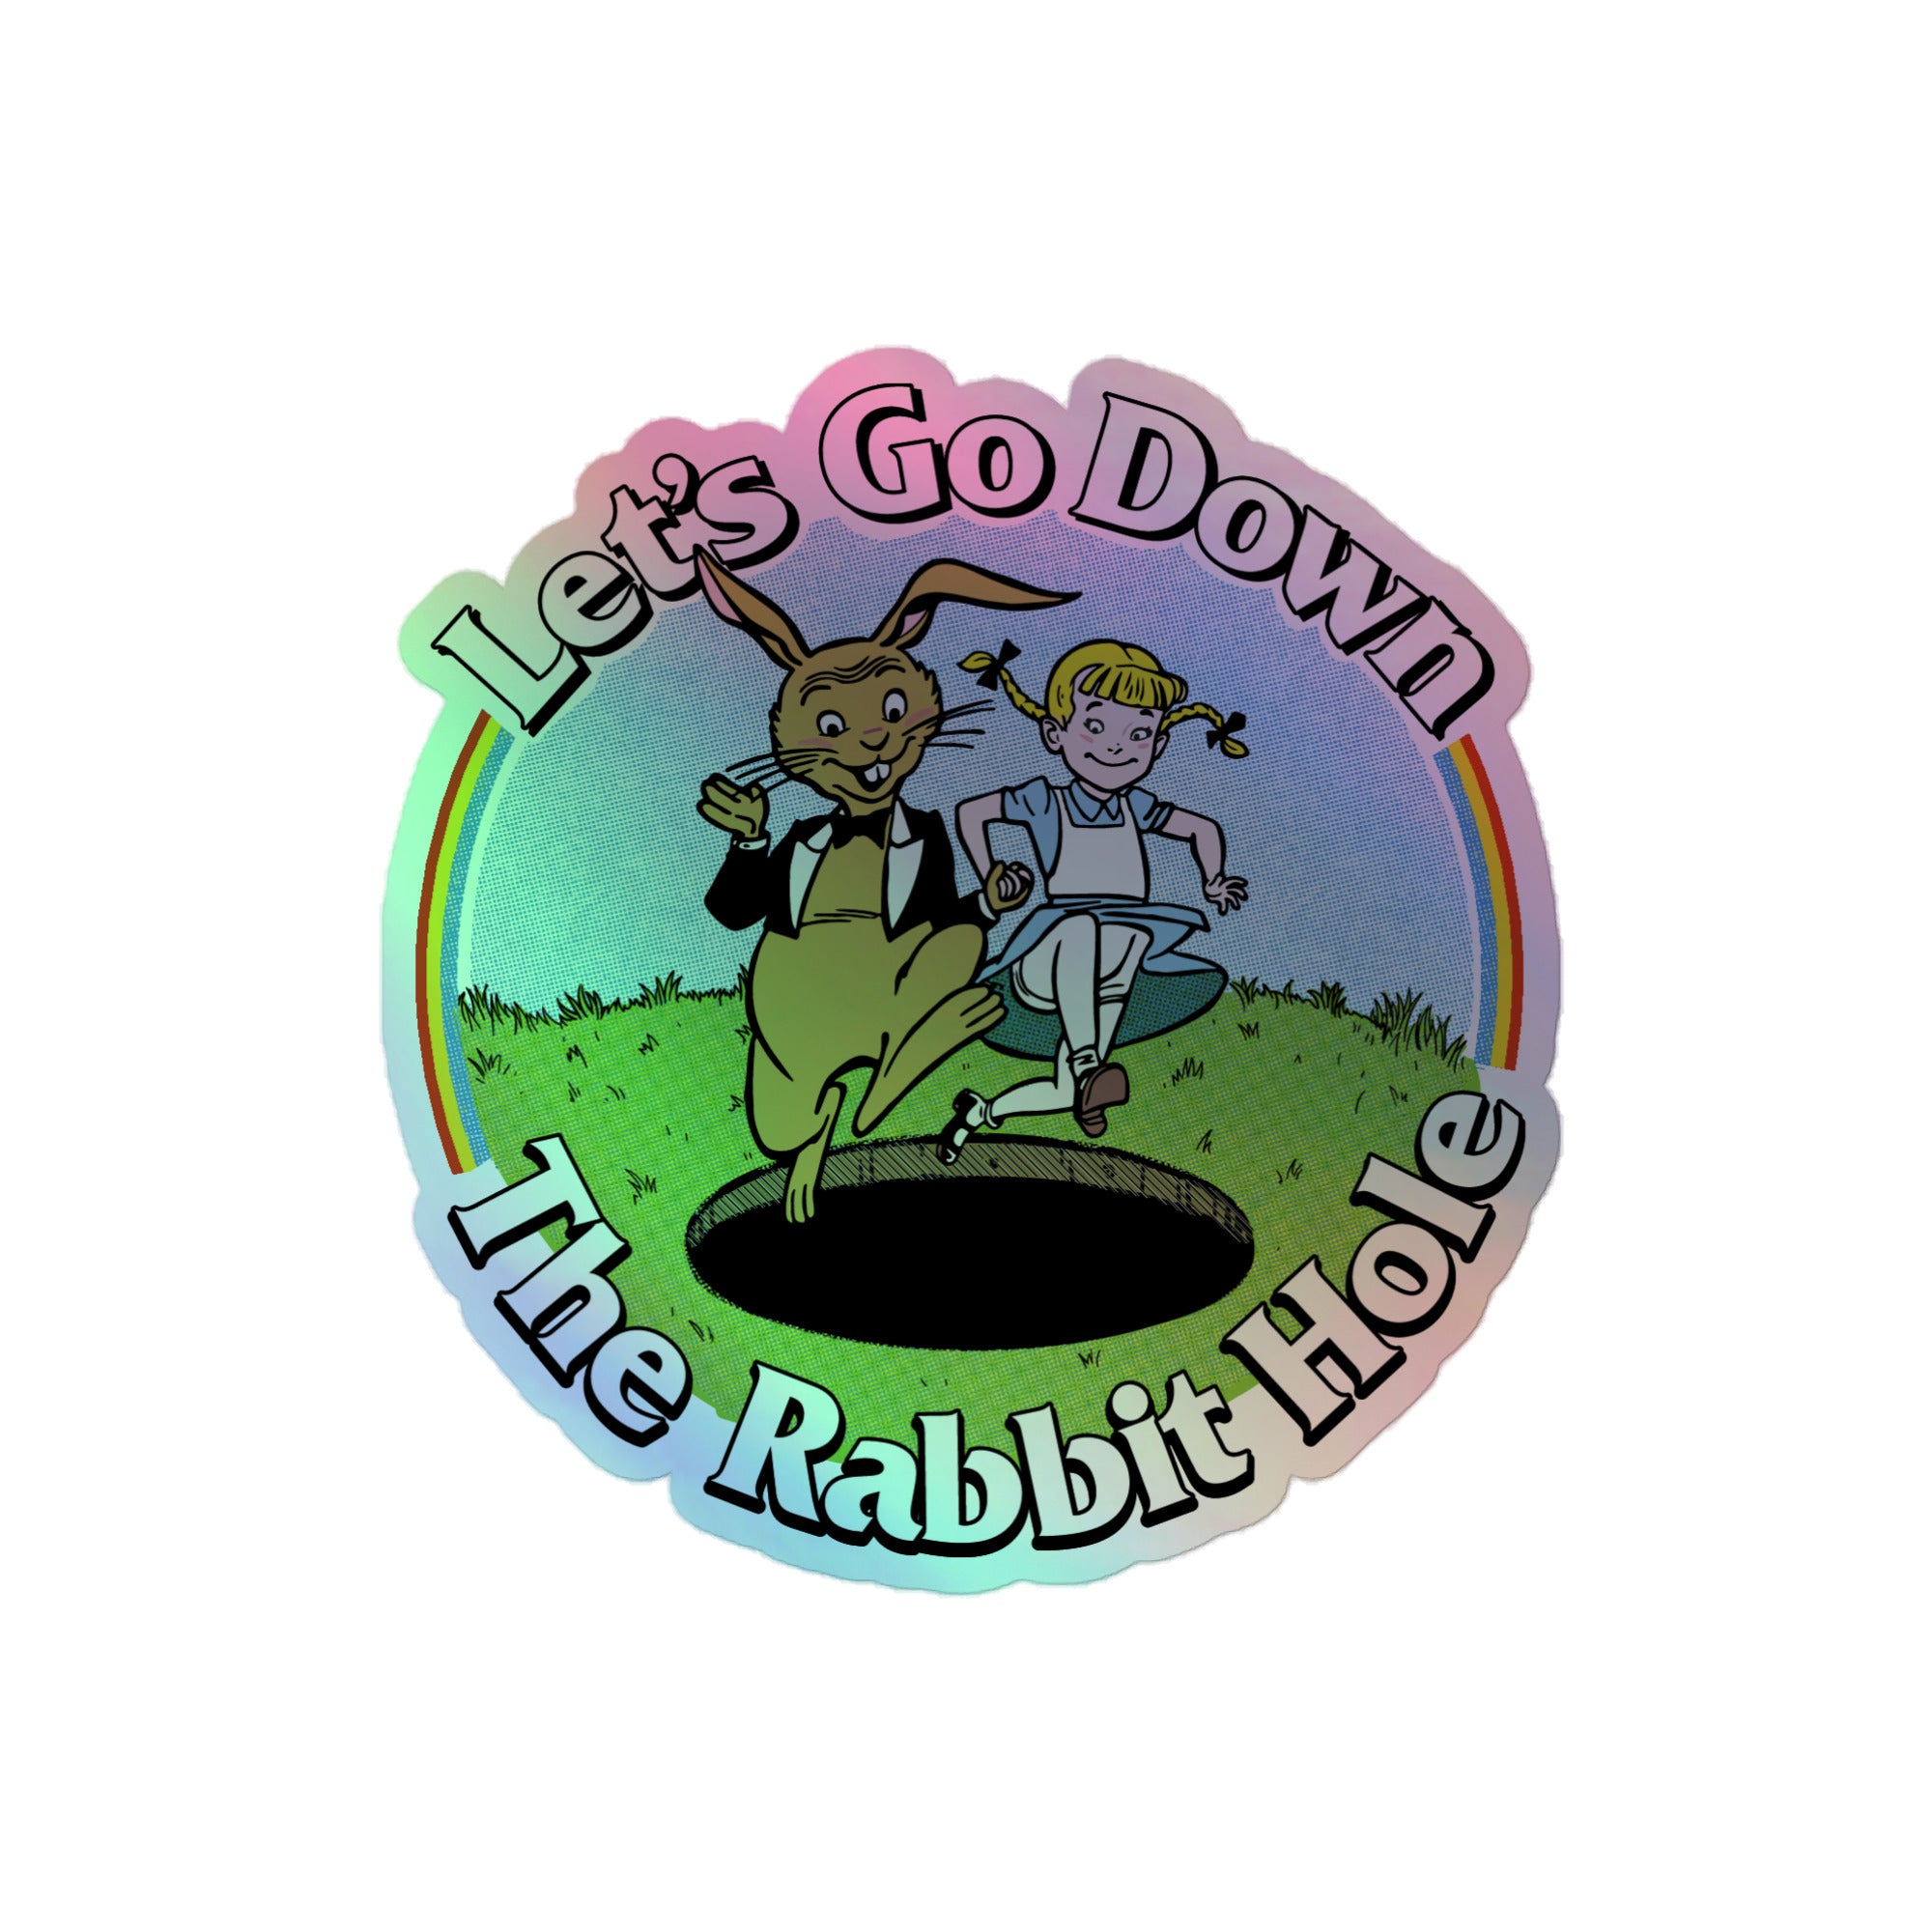 Let's Go Down the Rabbit Hole Holographic stickers